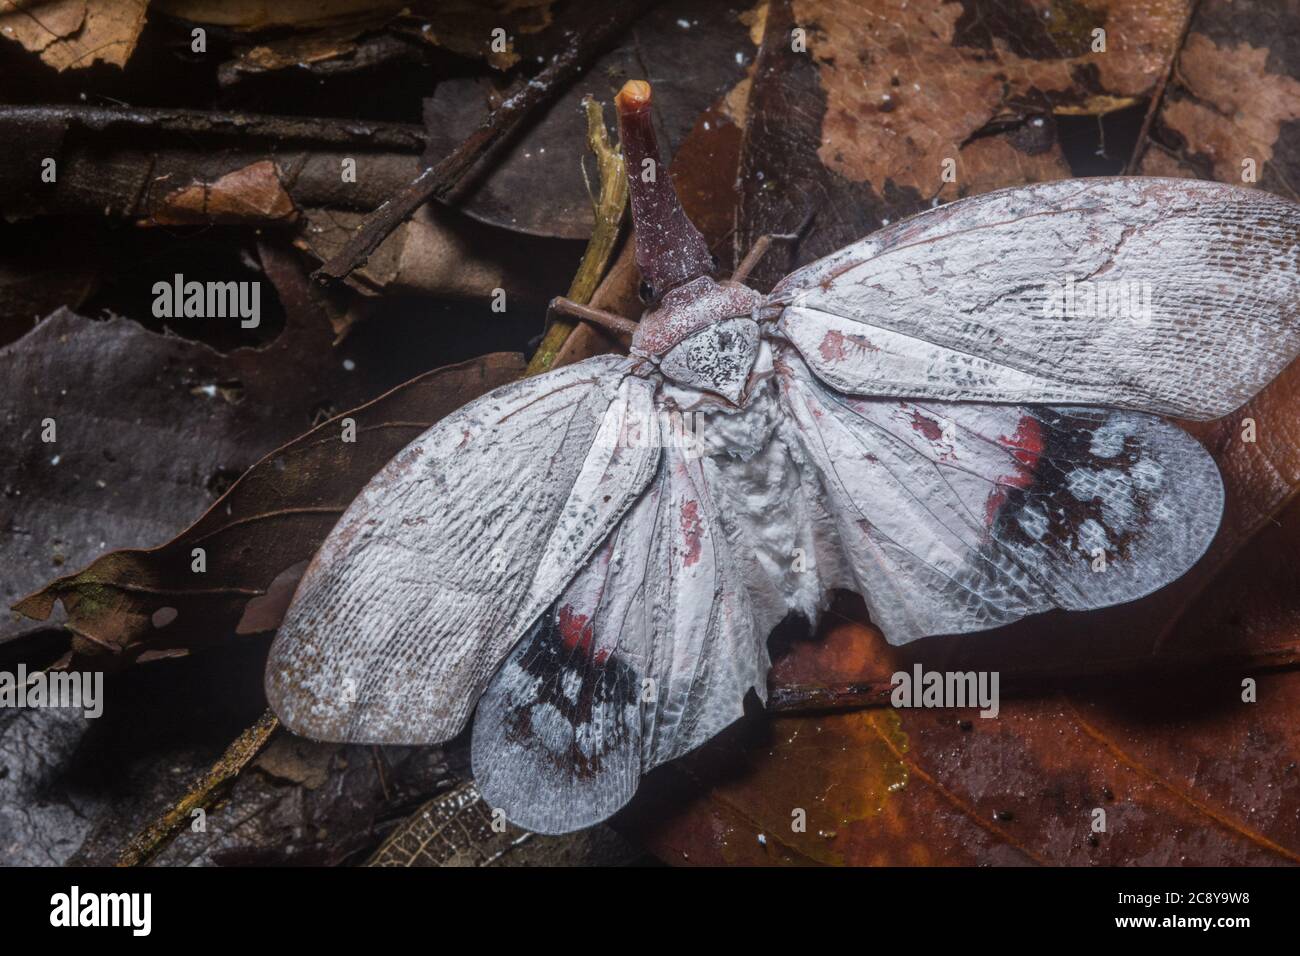 A large lantern bug (Pyrops sultana) a type of planthopper from Borneo. Stock Photo